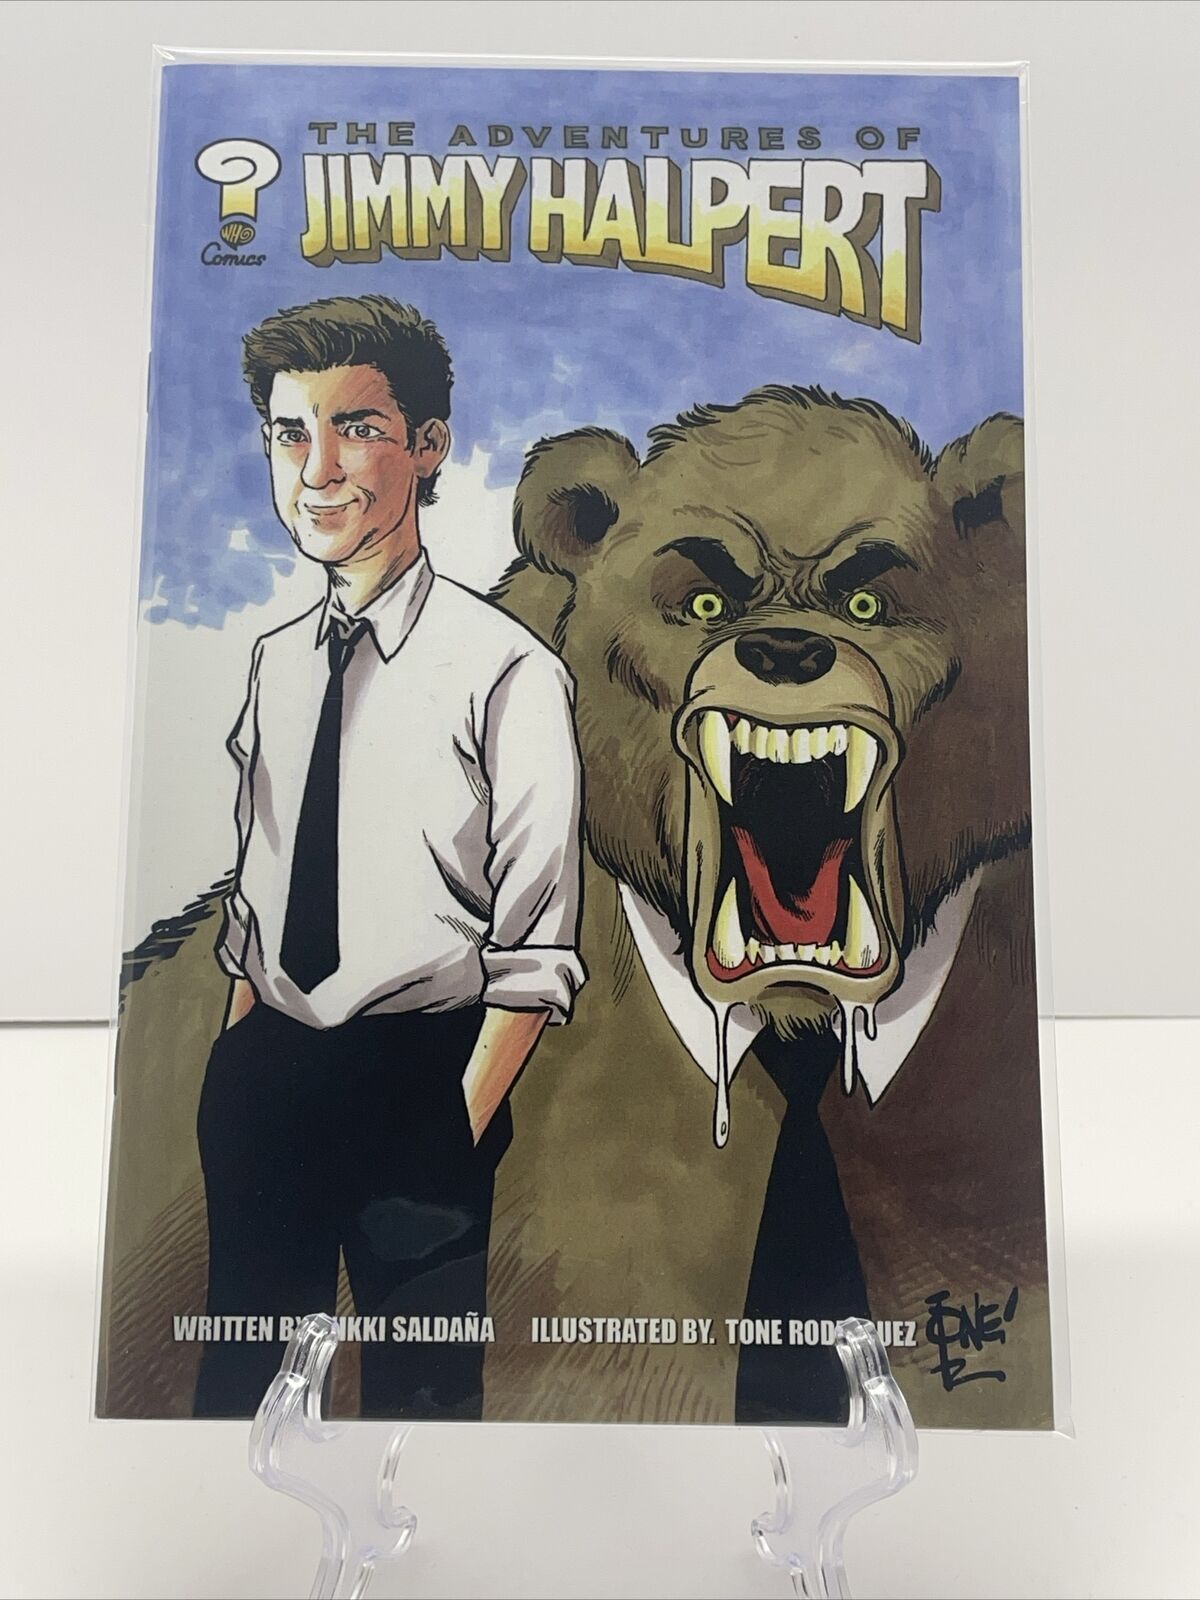 THE OFFICE THE ADVENTURES OF JIMMY HALPERT COMIC BOOK BY TONE RODRIGUEZ